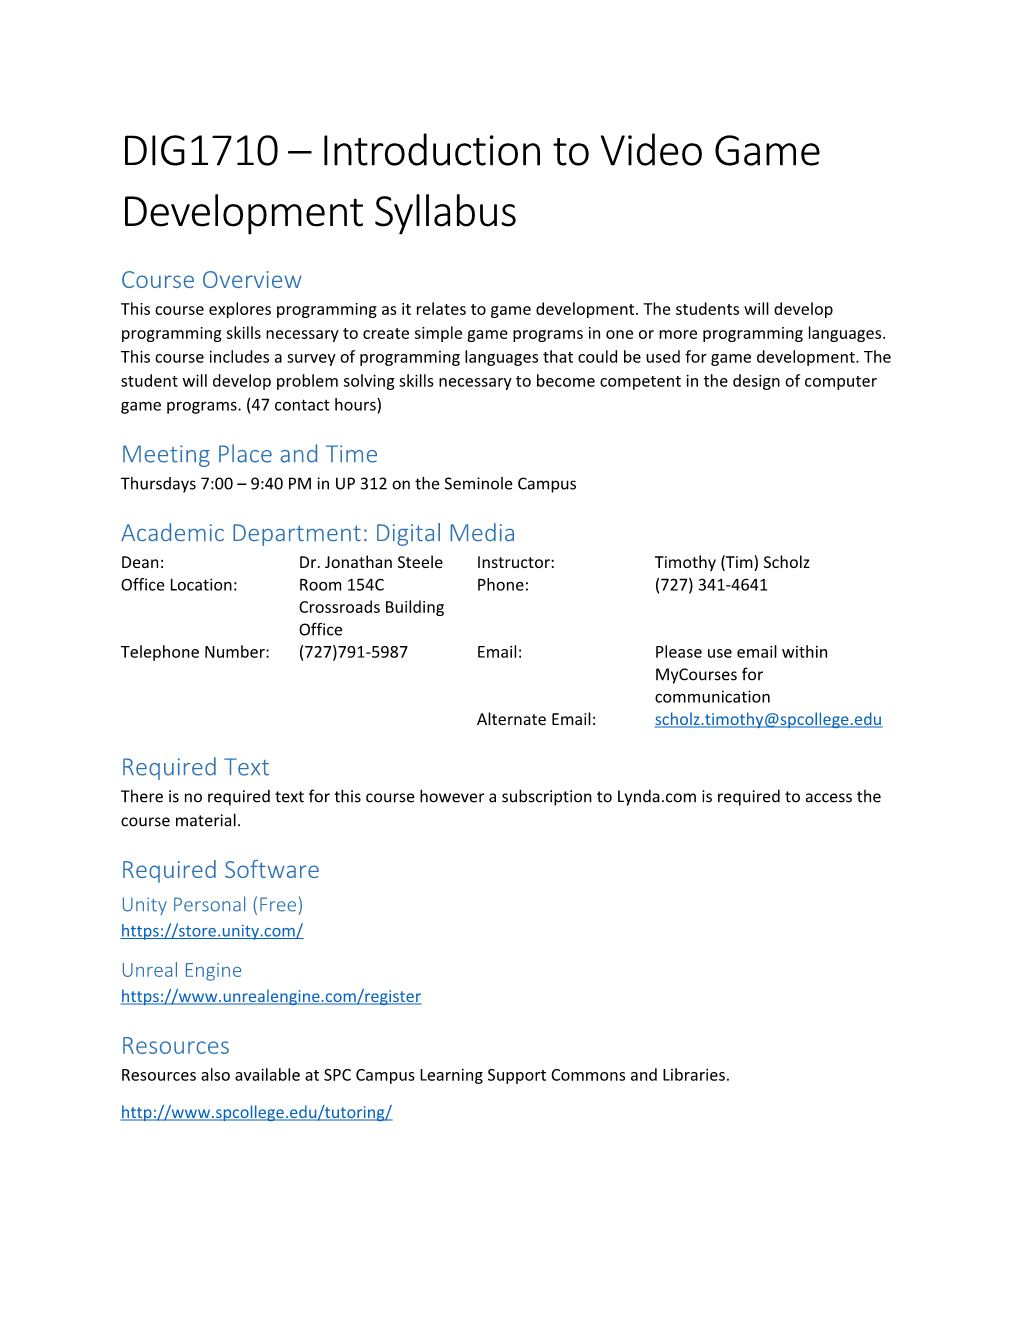 DIG1710 Introduction to Video Game Development Syllabus